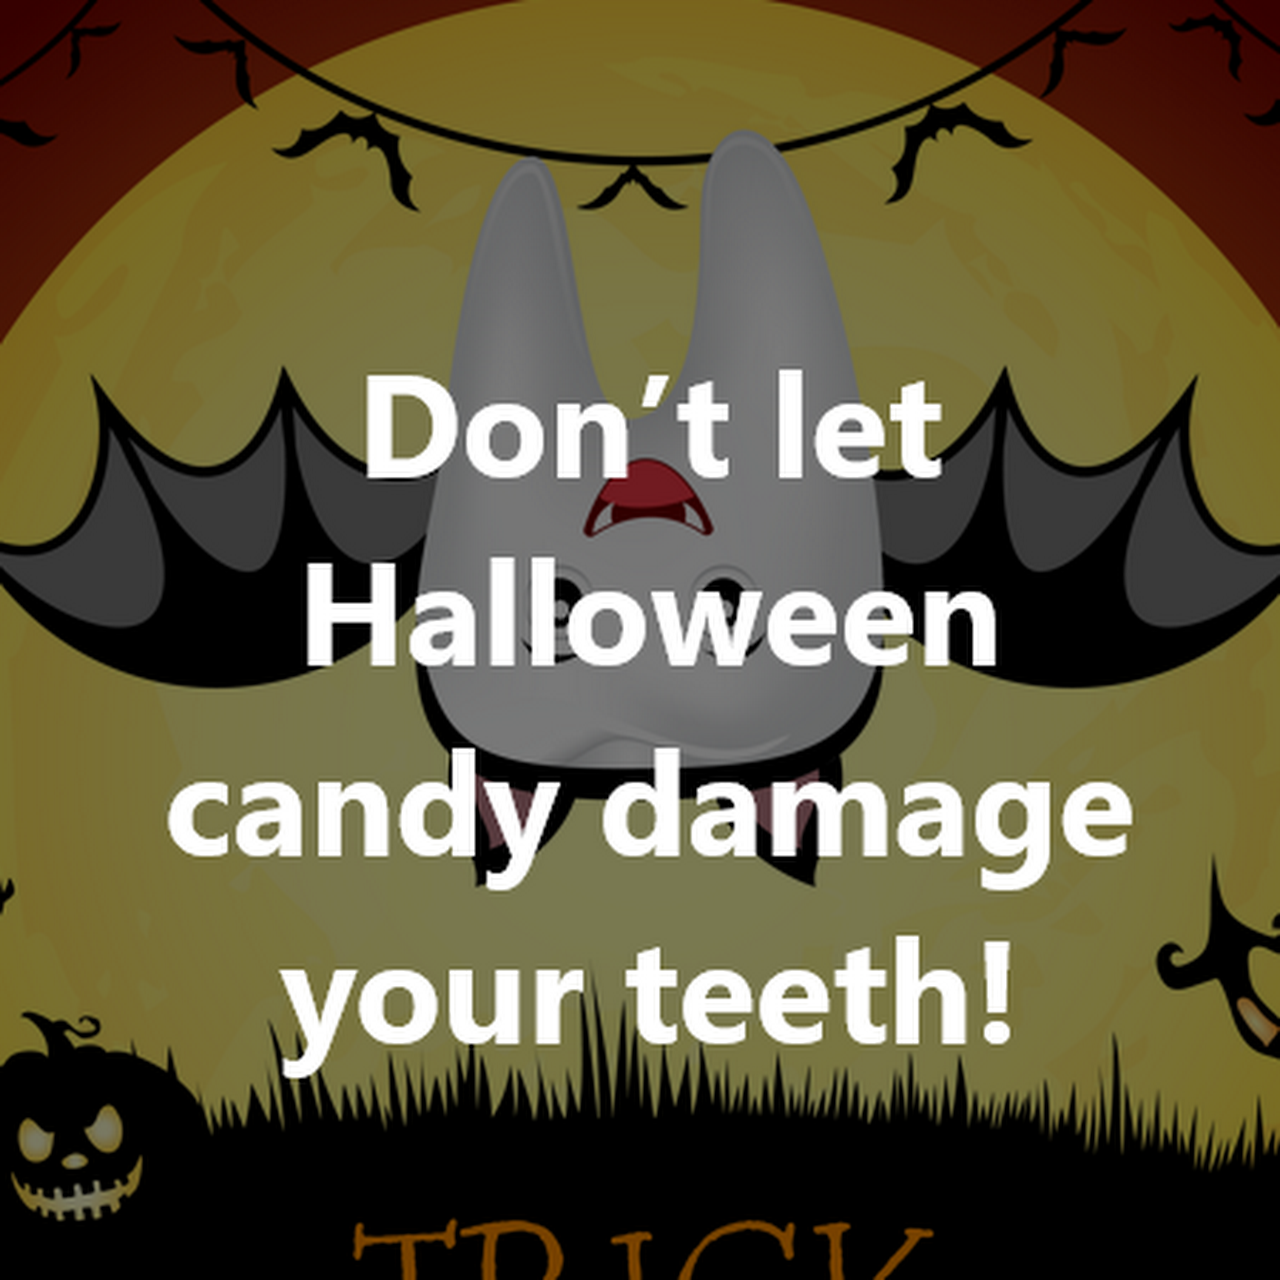 Don’t let Holloween candy damage your teeth!